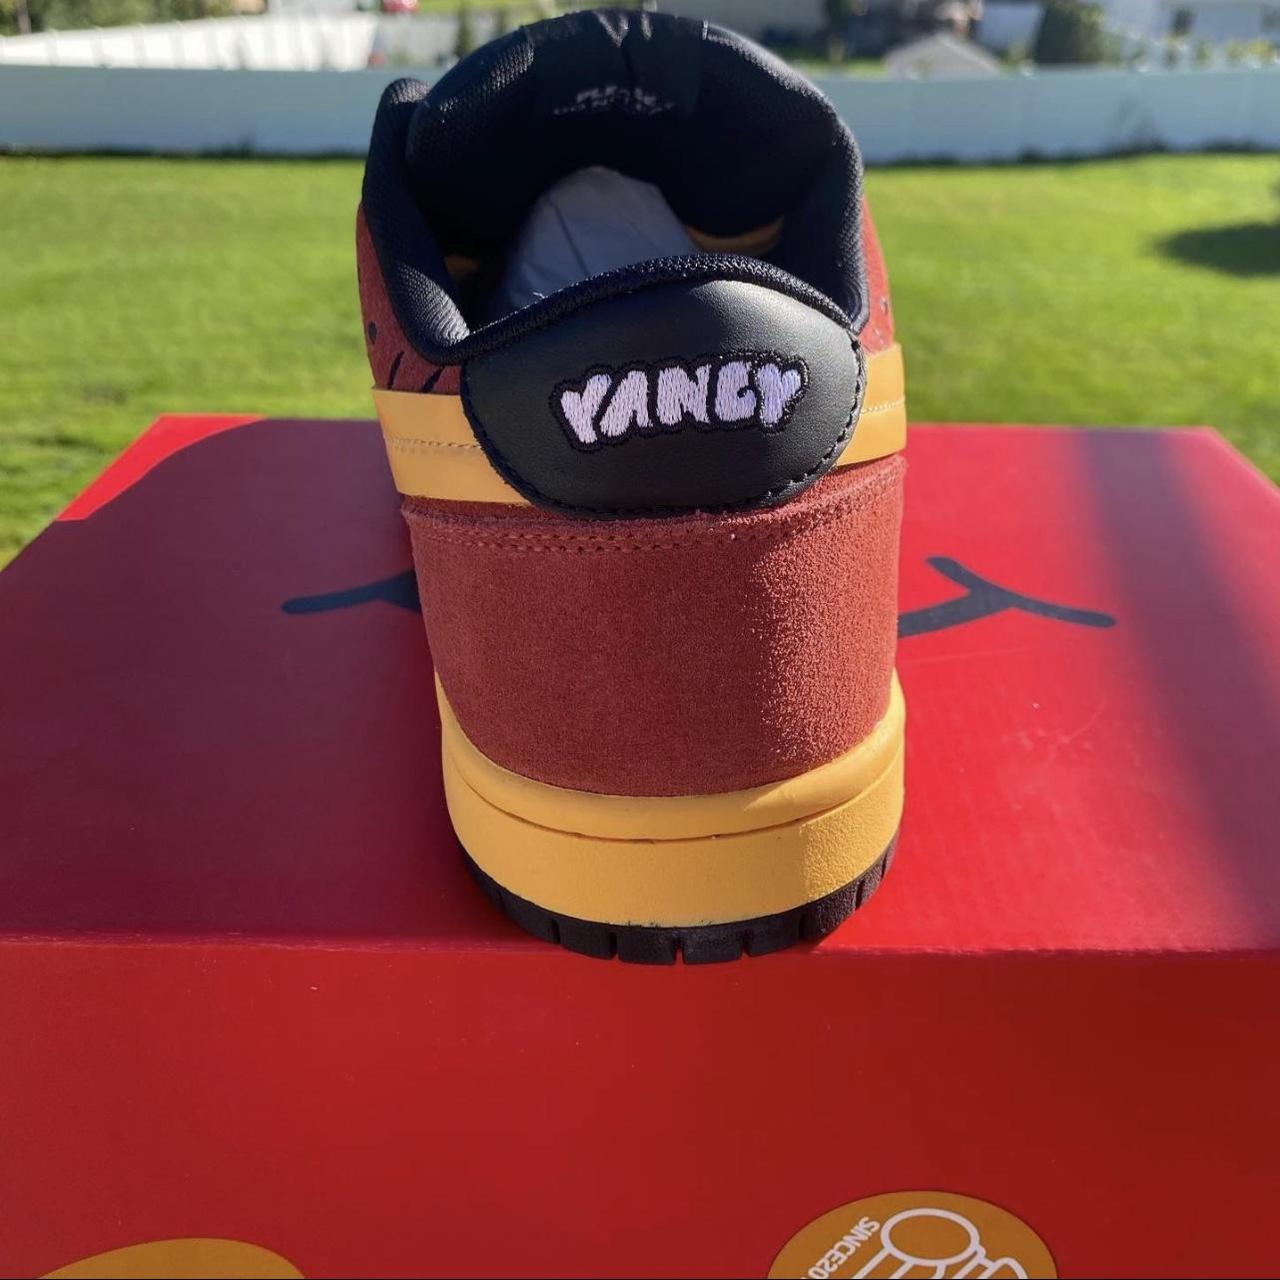 New/Never worn Vandy The Pink dunk in the rice - Depop